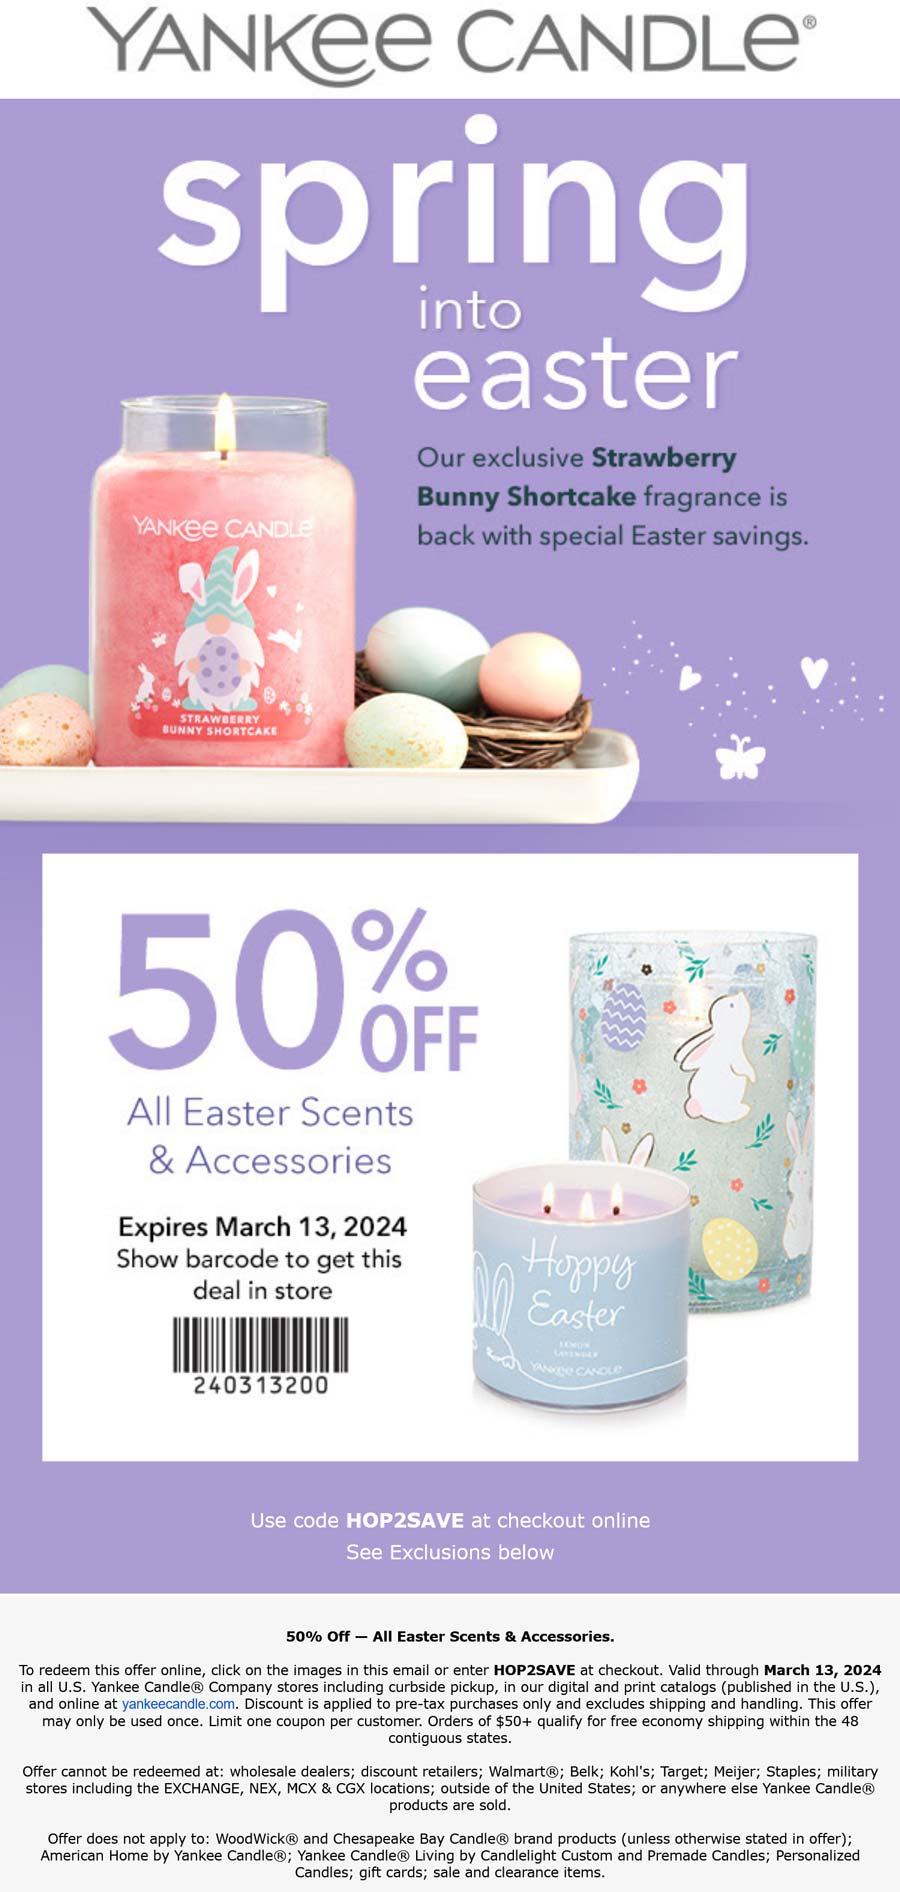 Yankee Candle stores Coupon  50% off Easter scents today at Yankee Candle, or online via promo code HOP2SAVE #yankeecandle 